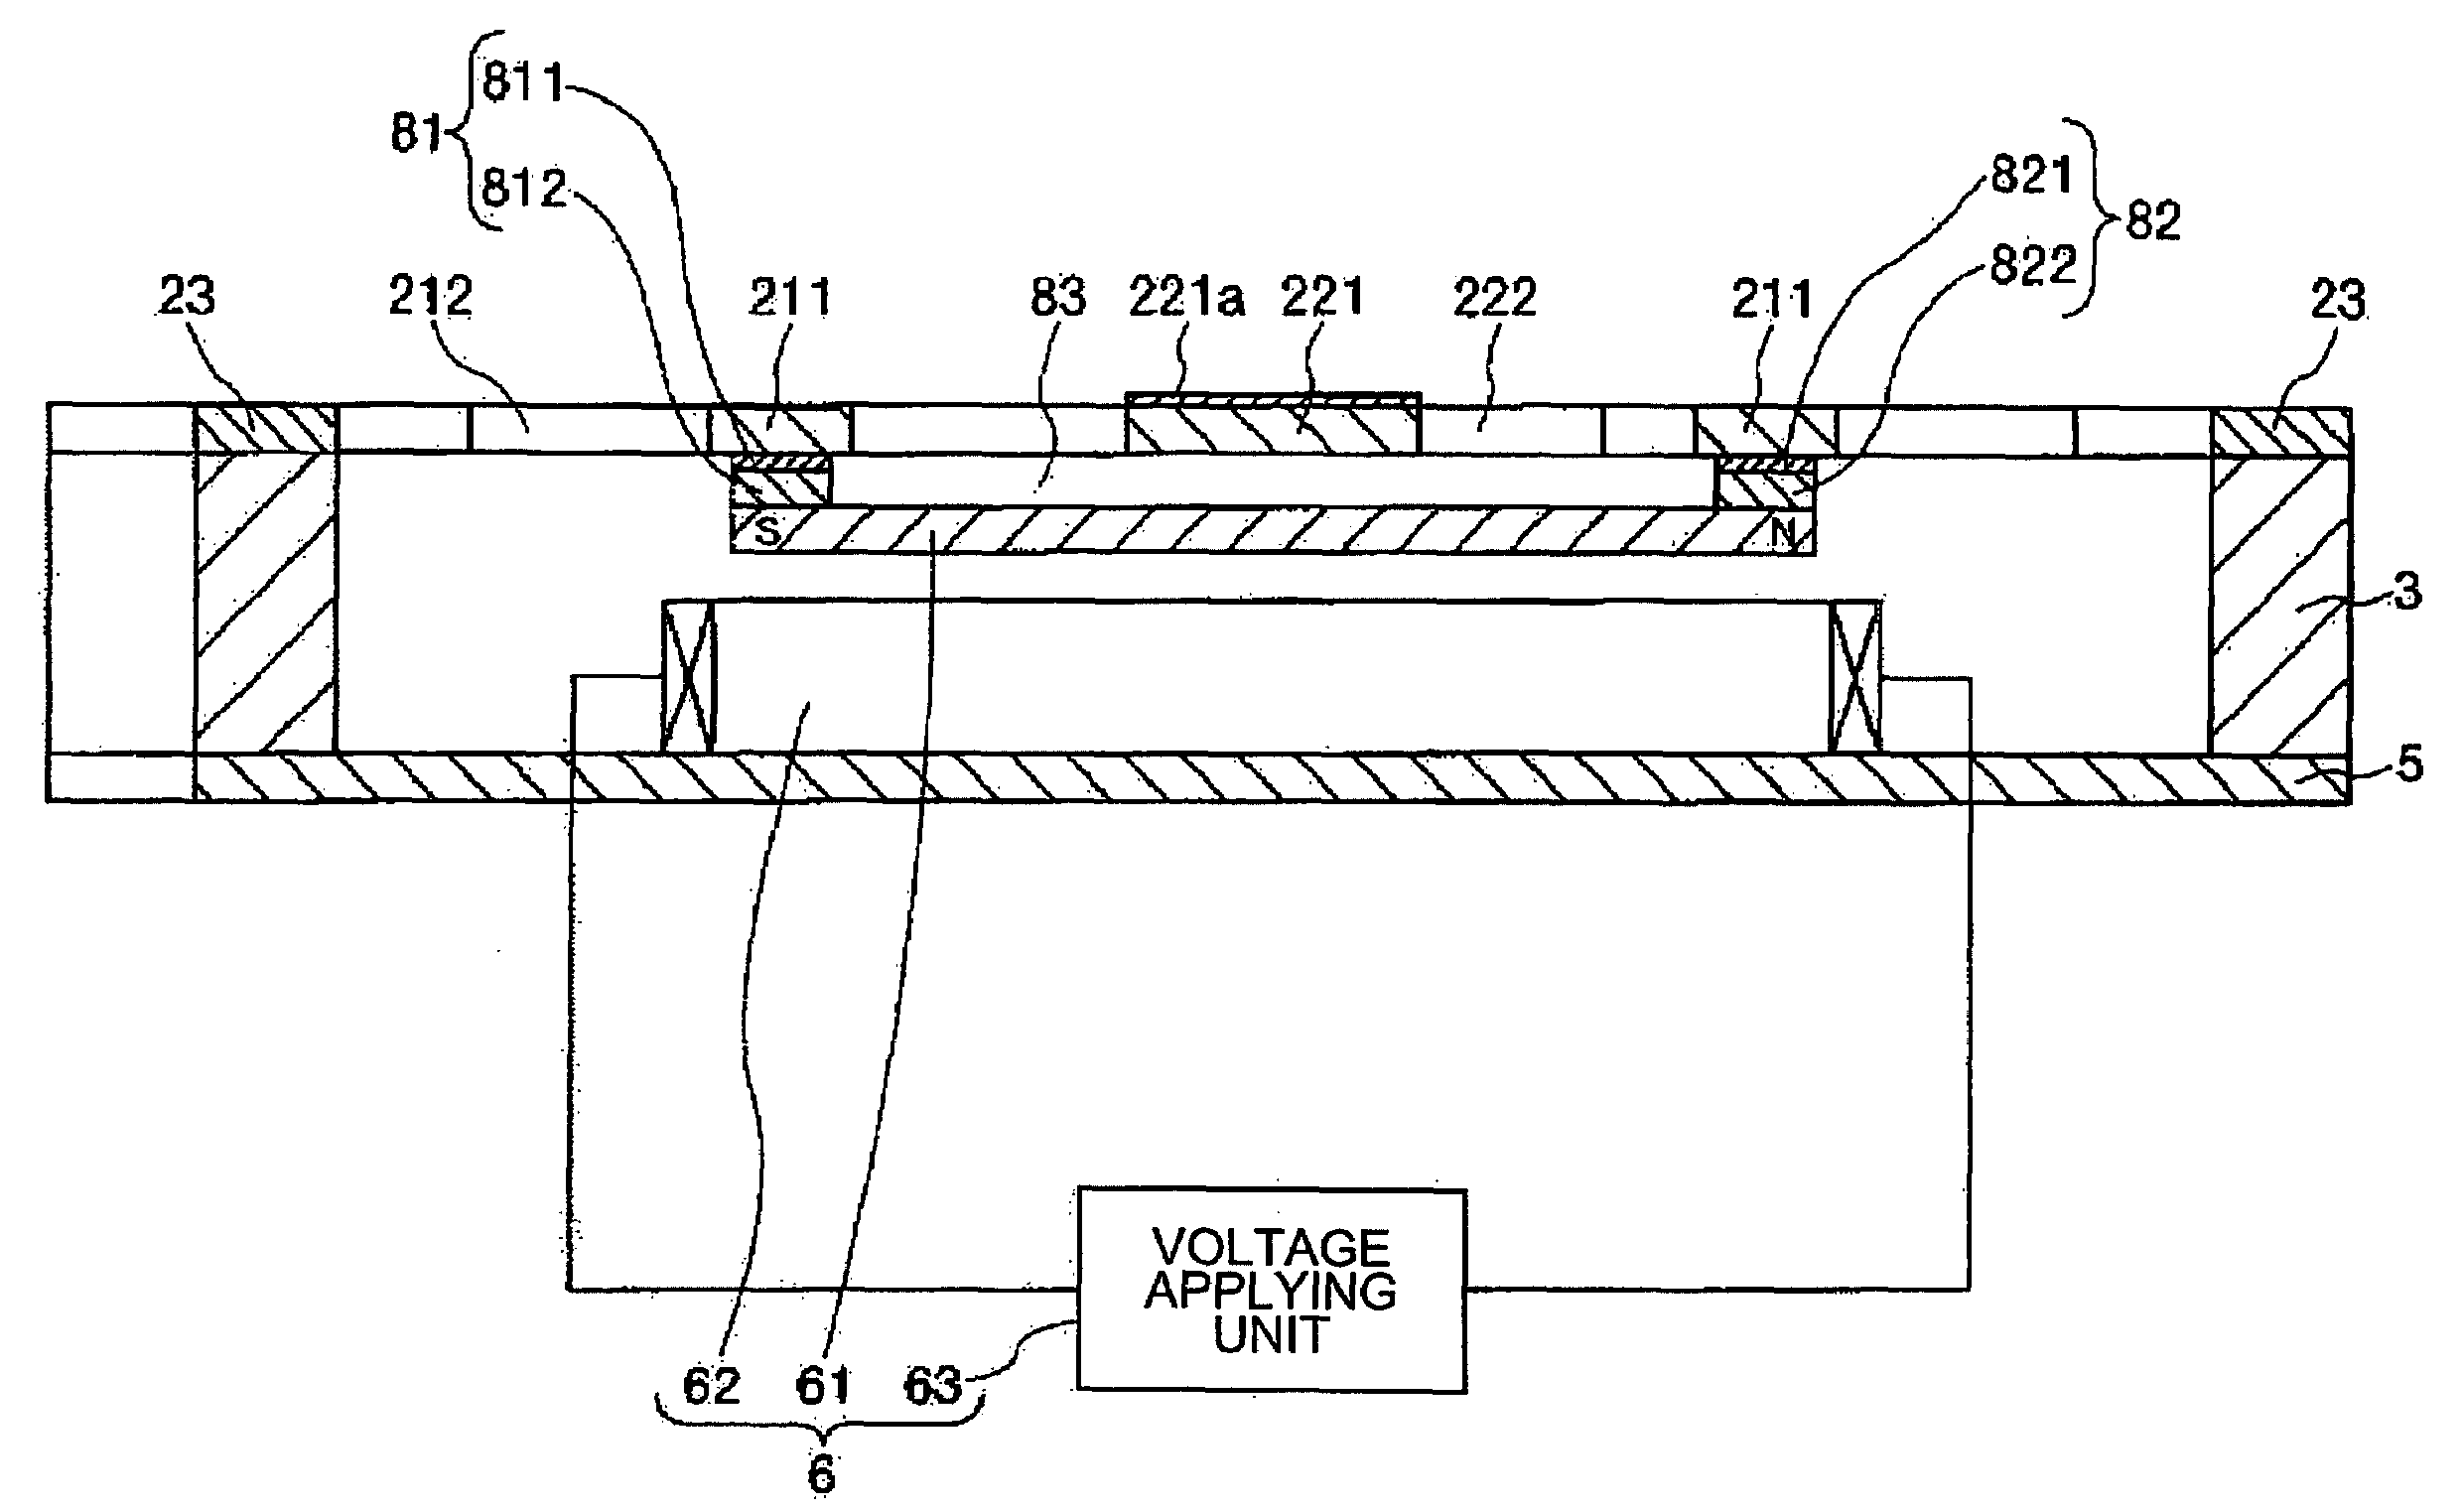 Actuator, optical scanner and image forming apparatus